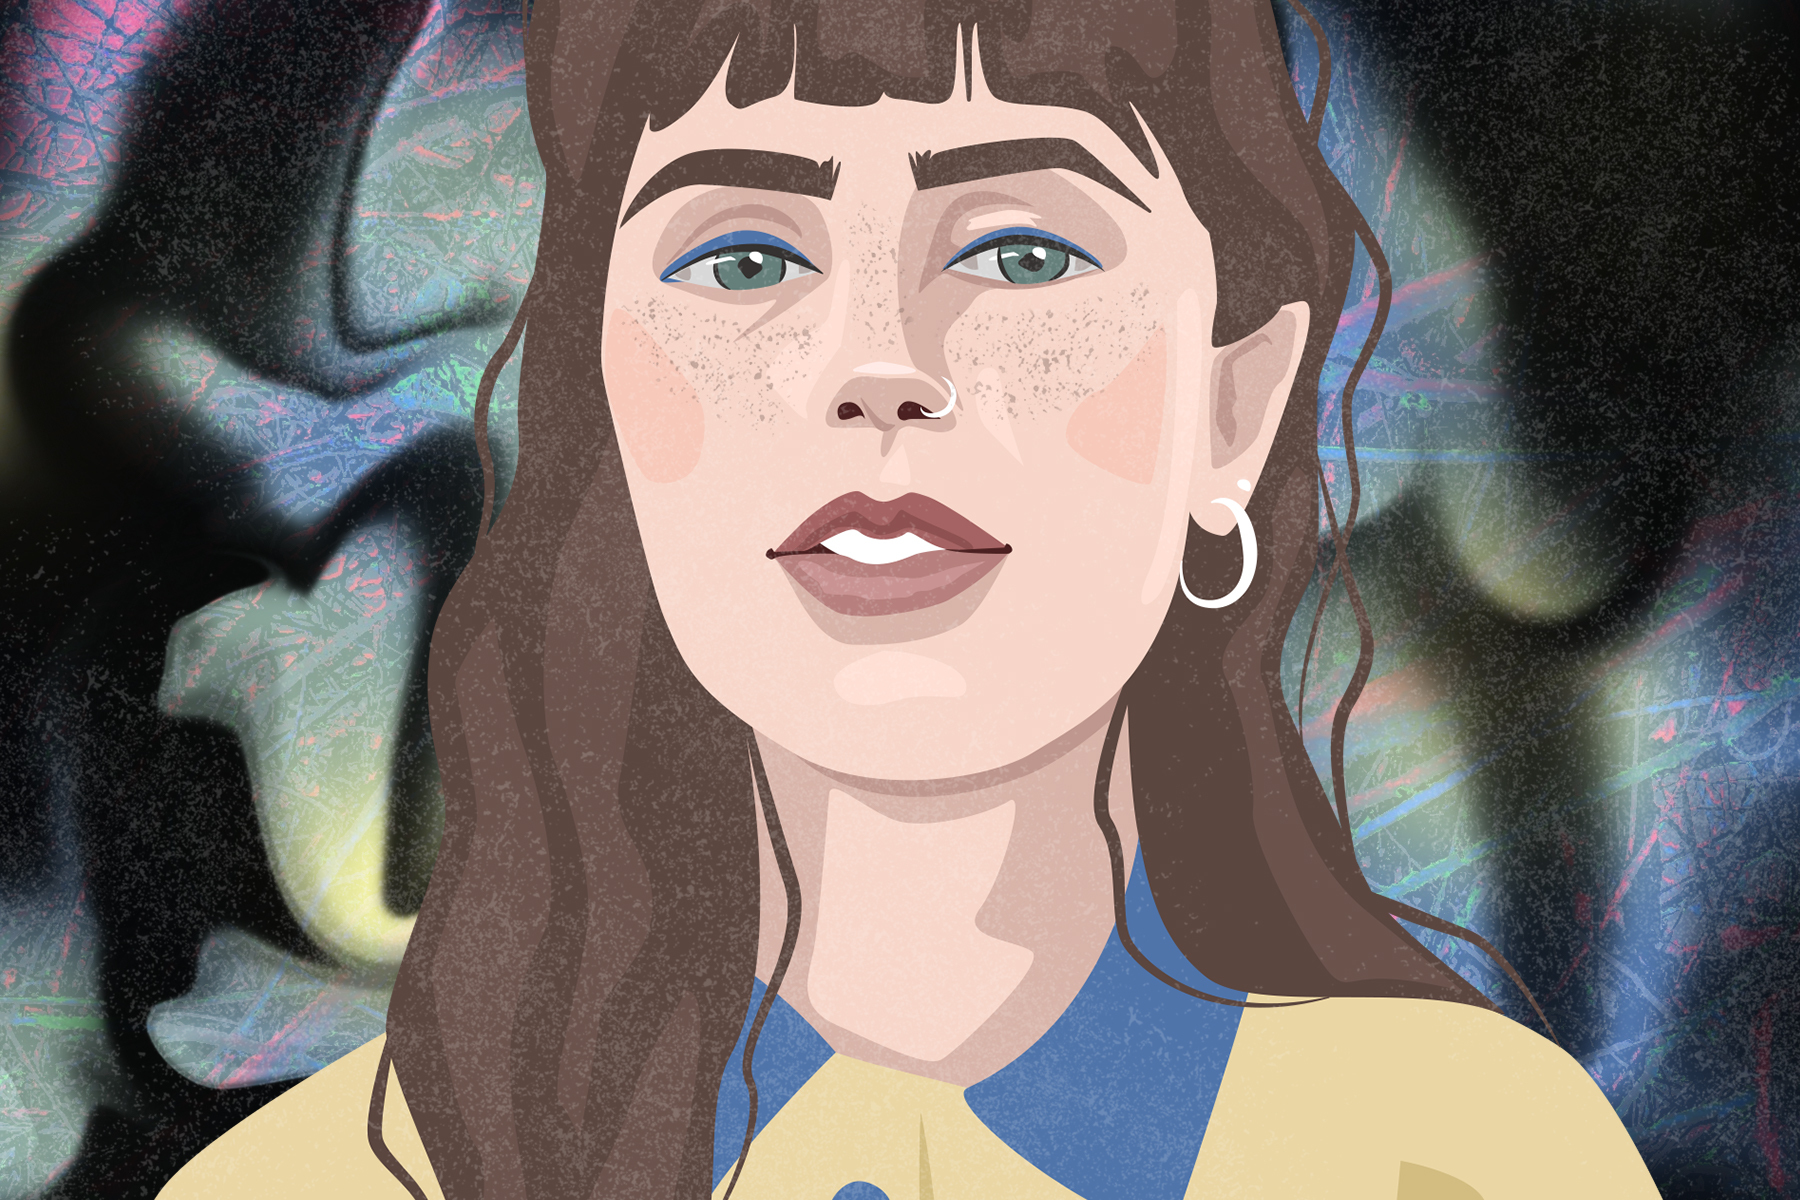 In an article about the album Sling, an illustration of Clairo